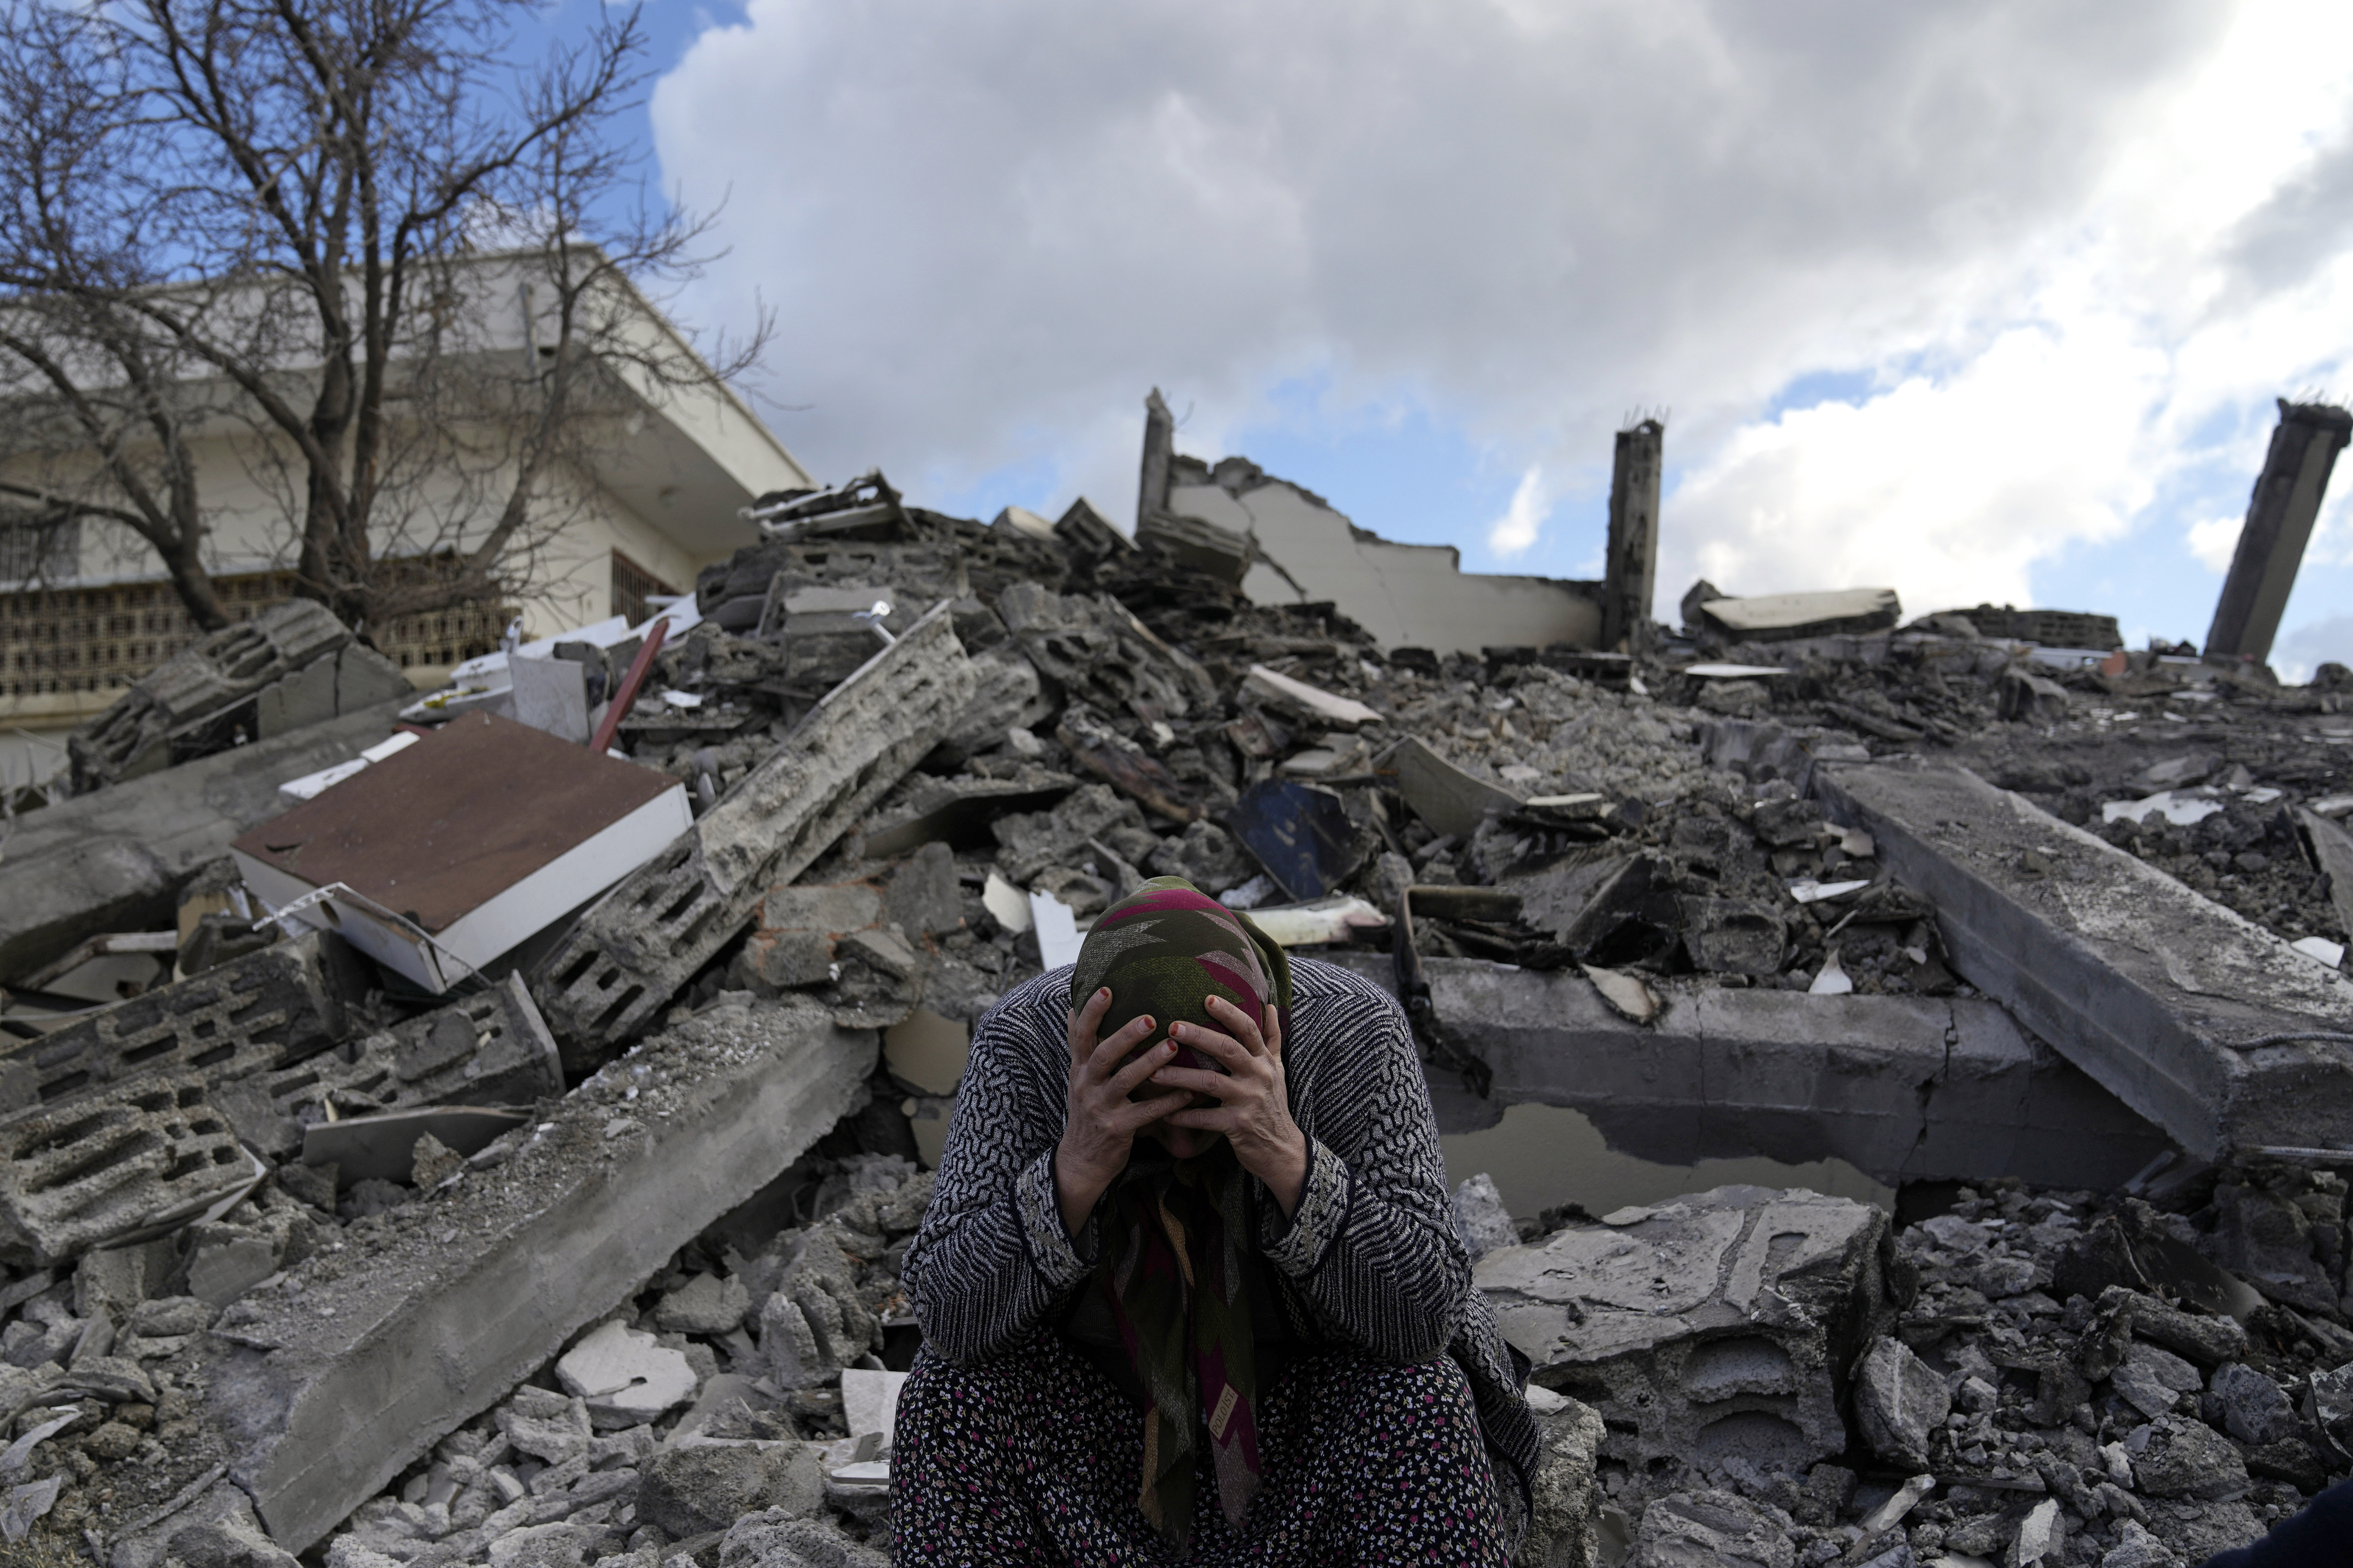 A woman sits on the rubble as emergency rescue teams search for people under the remains of destroyed buildings in Nurdagi town on the outskirts of Osmaniye city southern Turkey